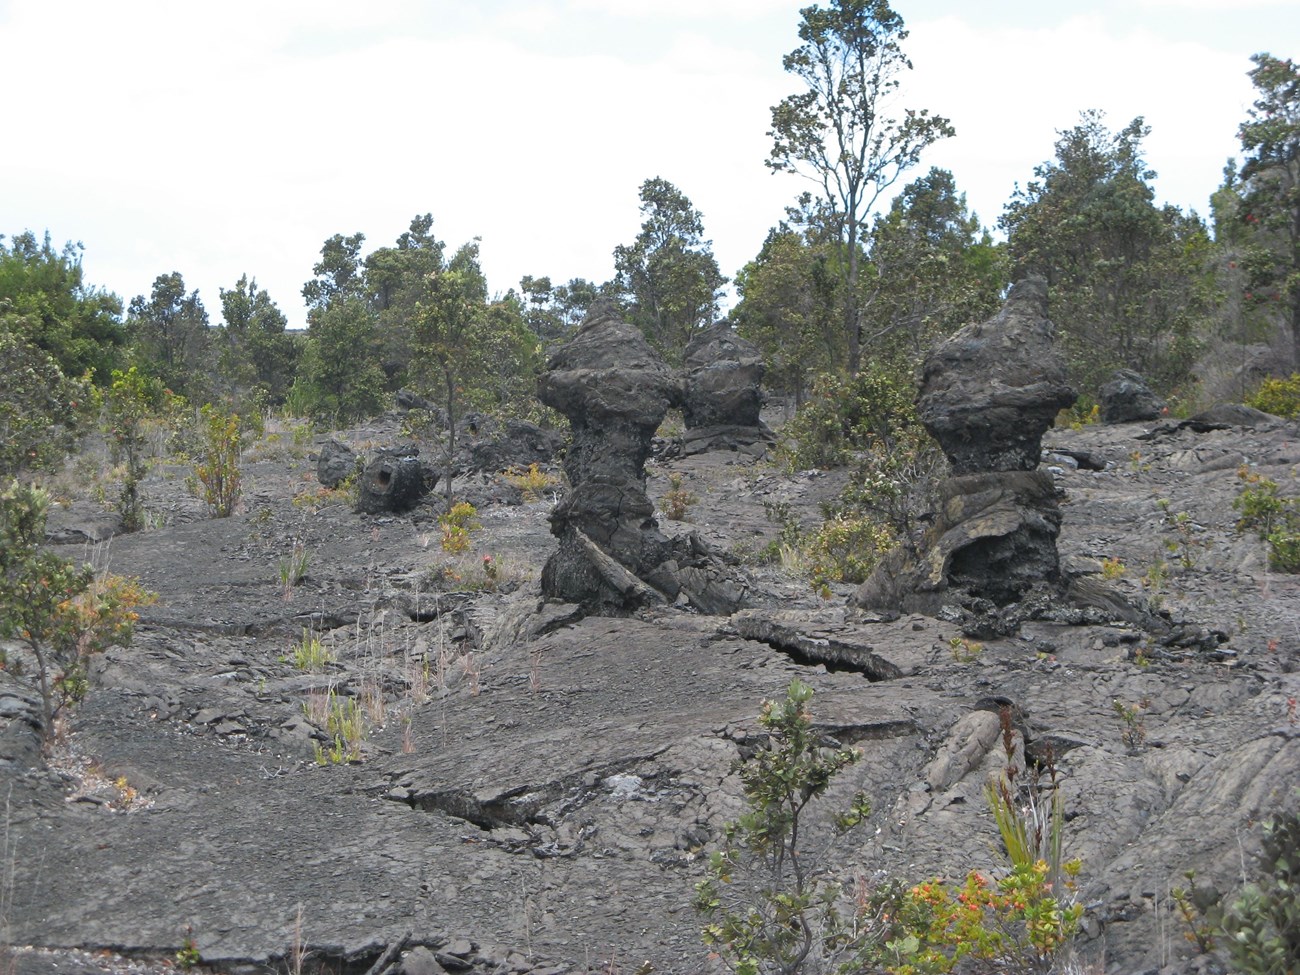 photo of lava covered ground with upright tree molds stand in the middle ground